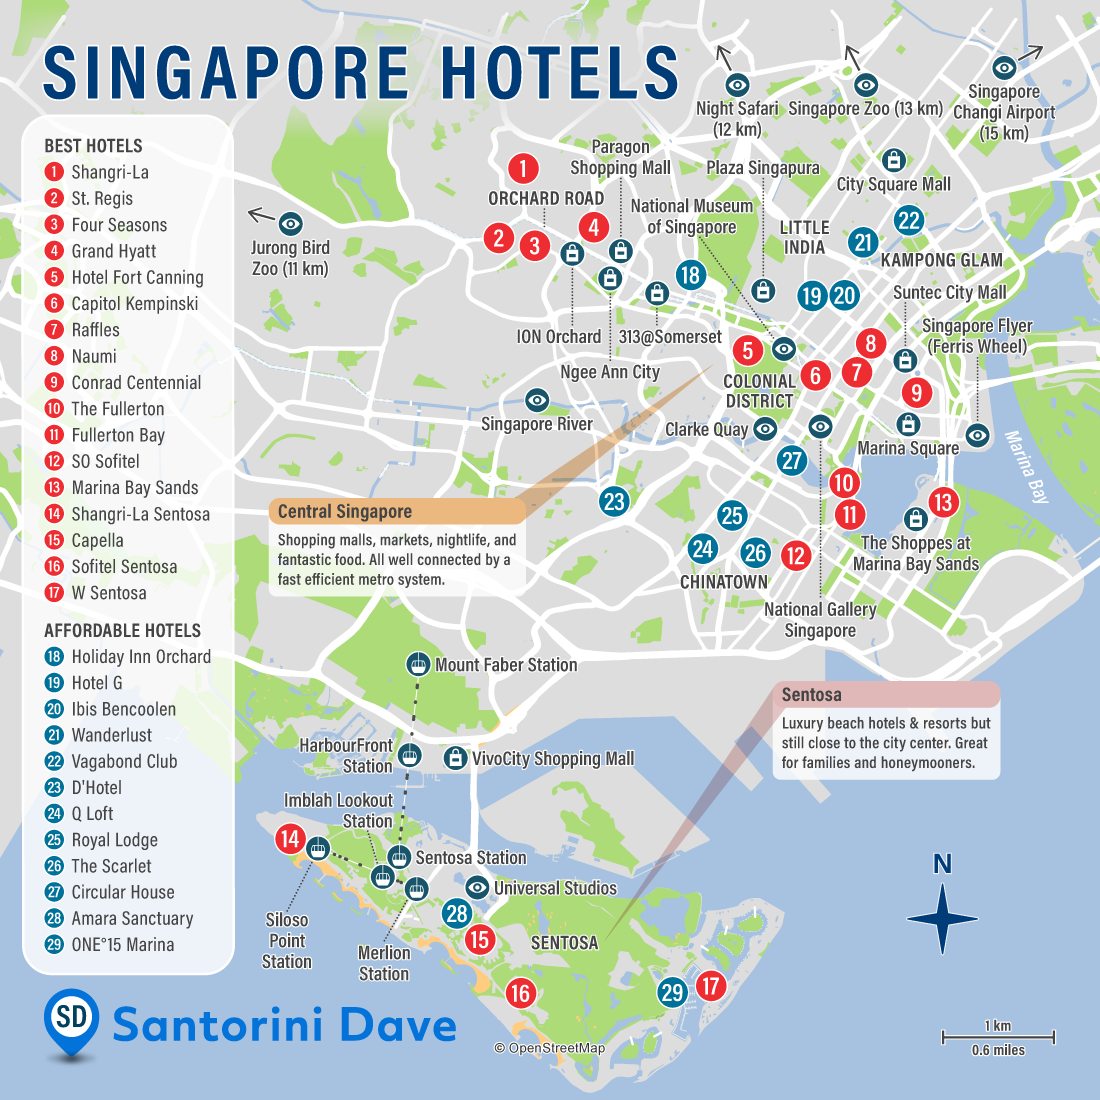 Map of best hotels and neighborhoods in Singapore.